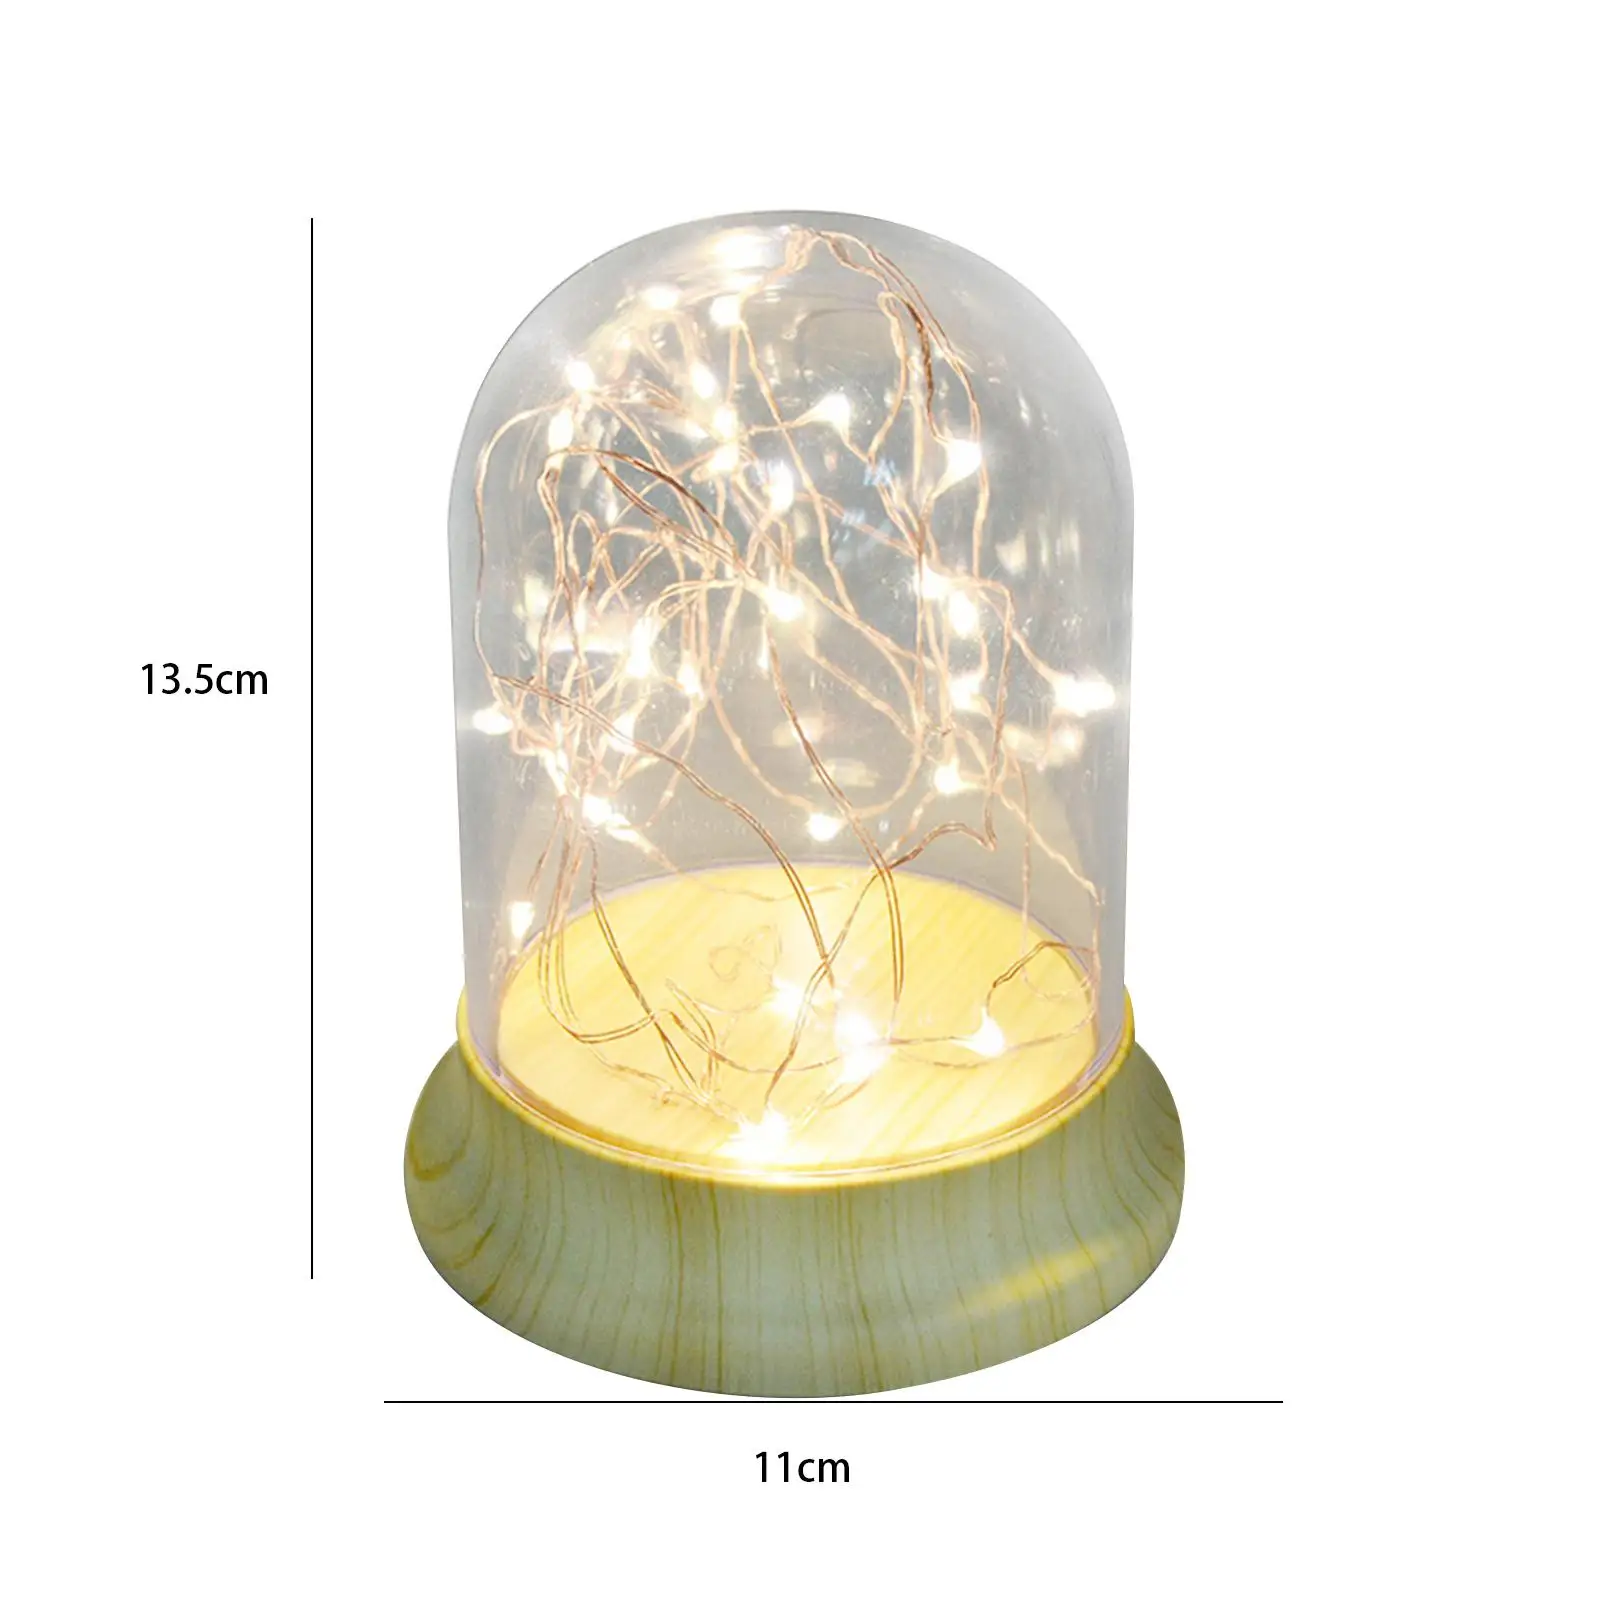 Night Light Handmade DIY Material Package Party Favor NightStand Lamp LED Atmosphere Lamp for Table Centerpieces Decoration Gift